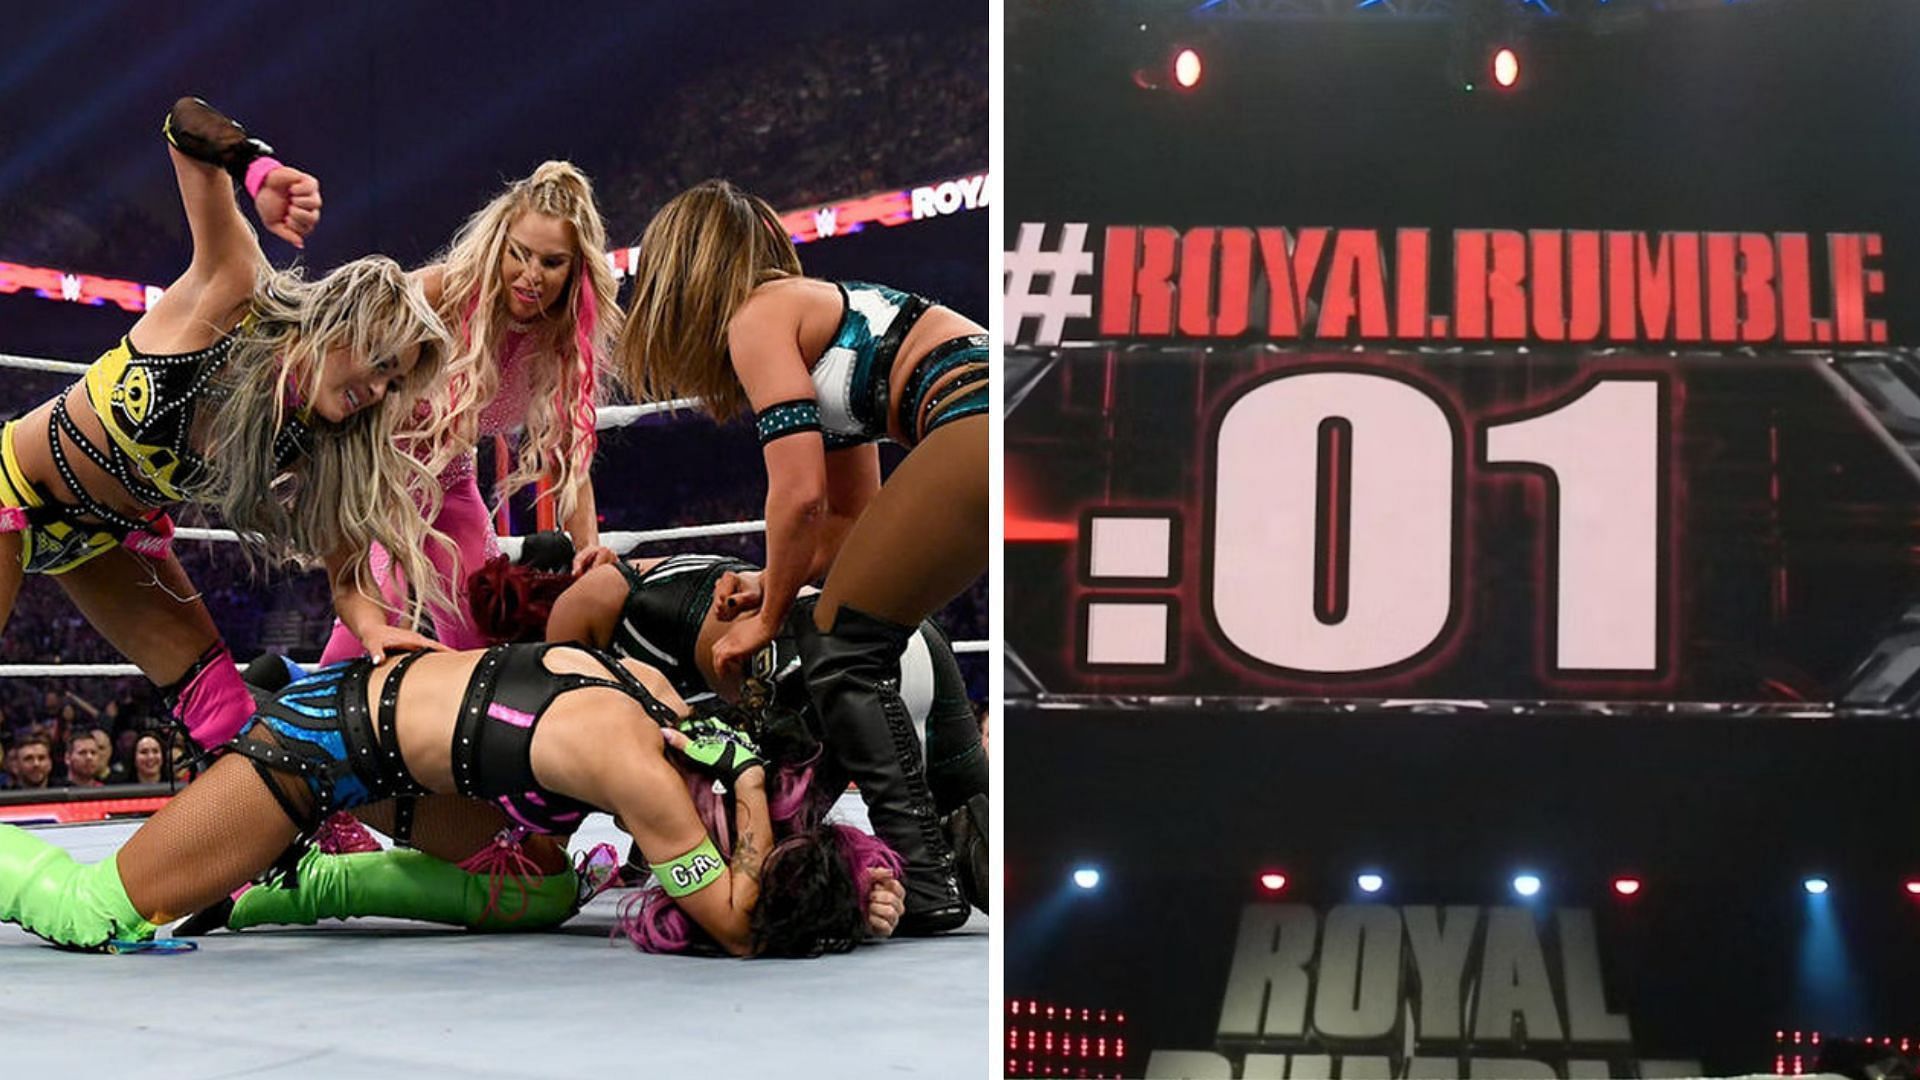 The 2023 WWE Royal Rumble took place this past Saturday night.